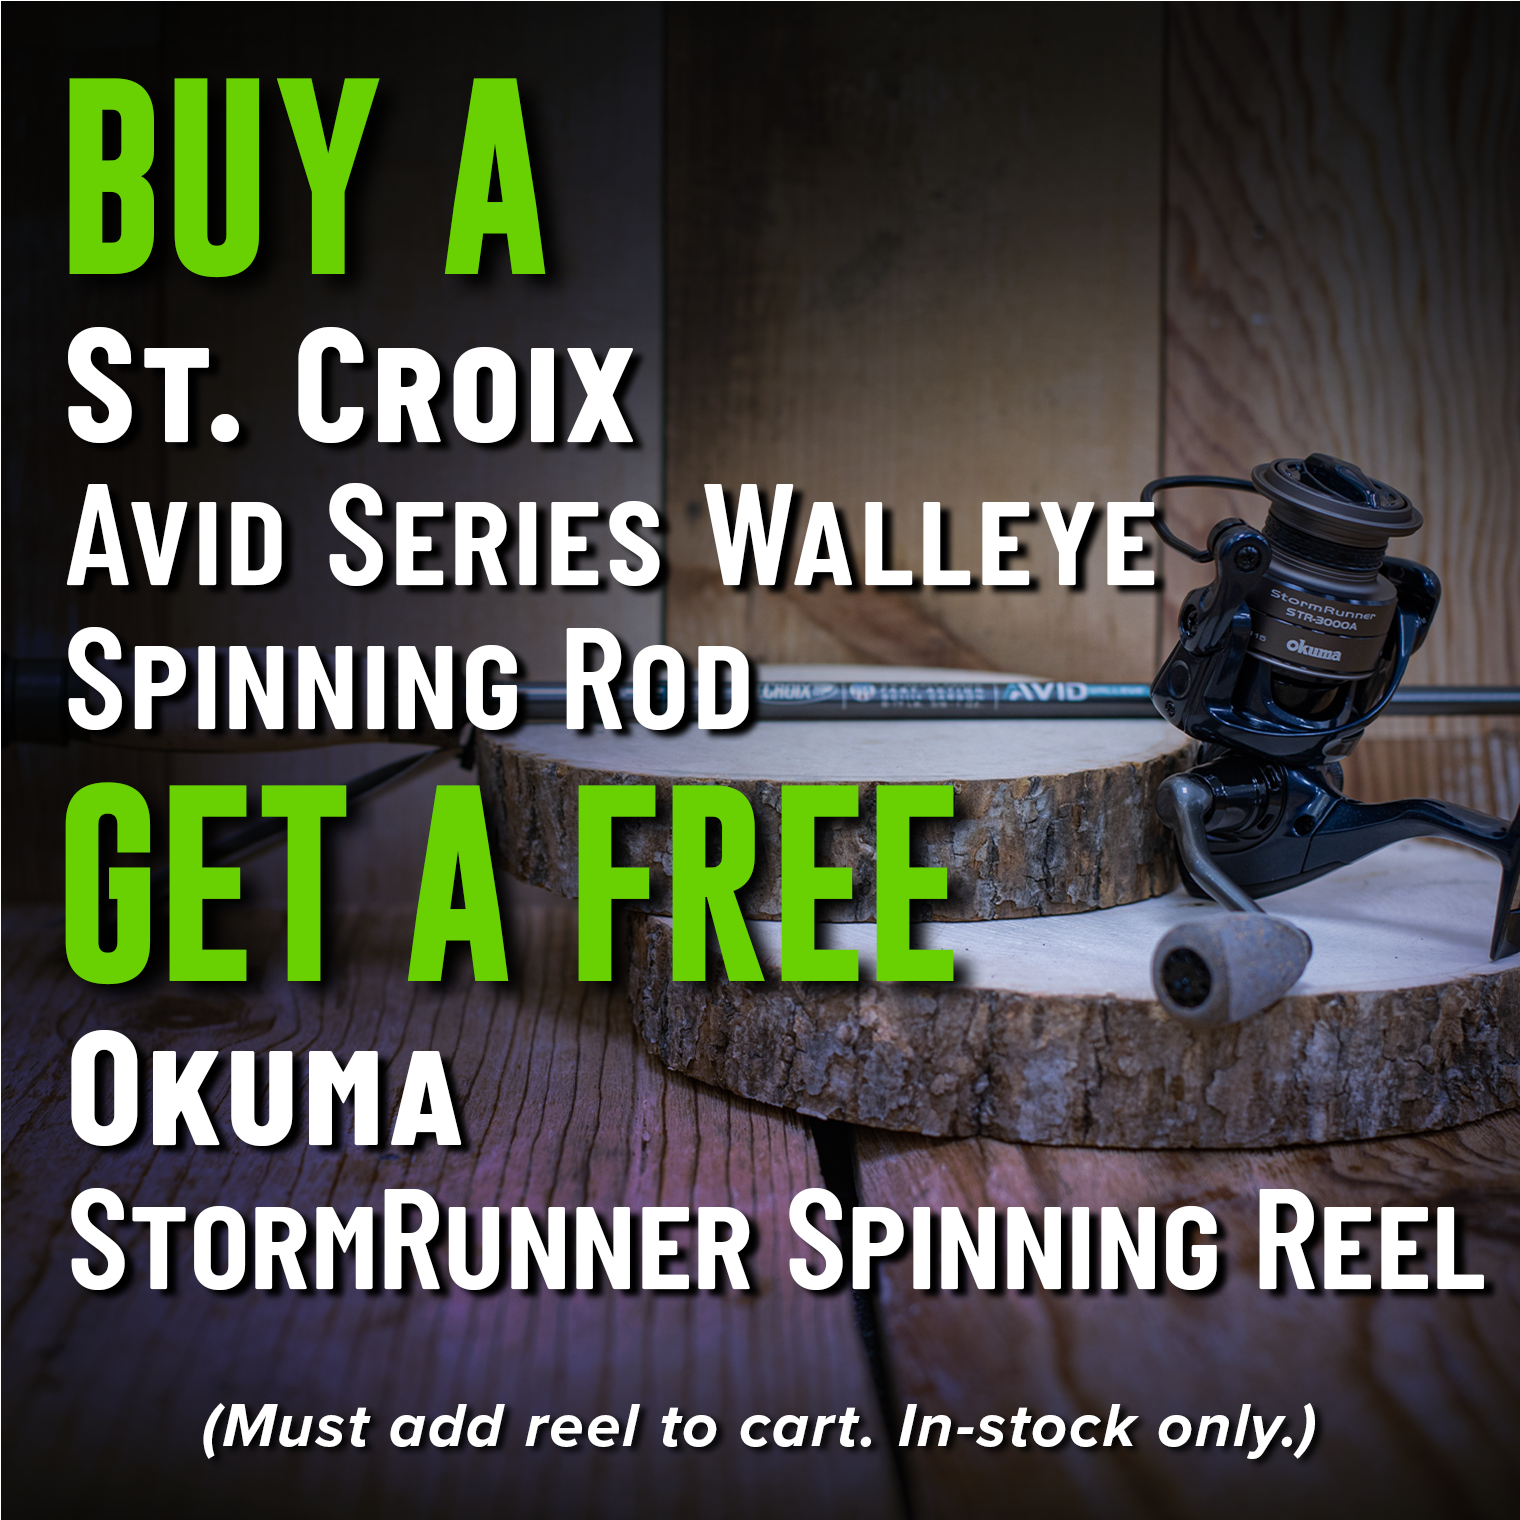 Buy a St. Croix Avid Series Walleye Spinning Rod Get a Free Okuma StormRunner Spinning Reel (Must add reel to cart. In-stock only.)